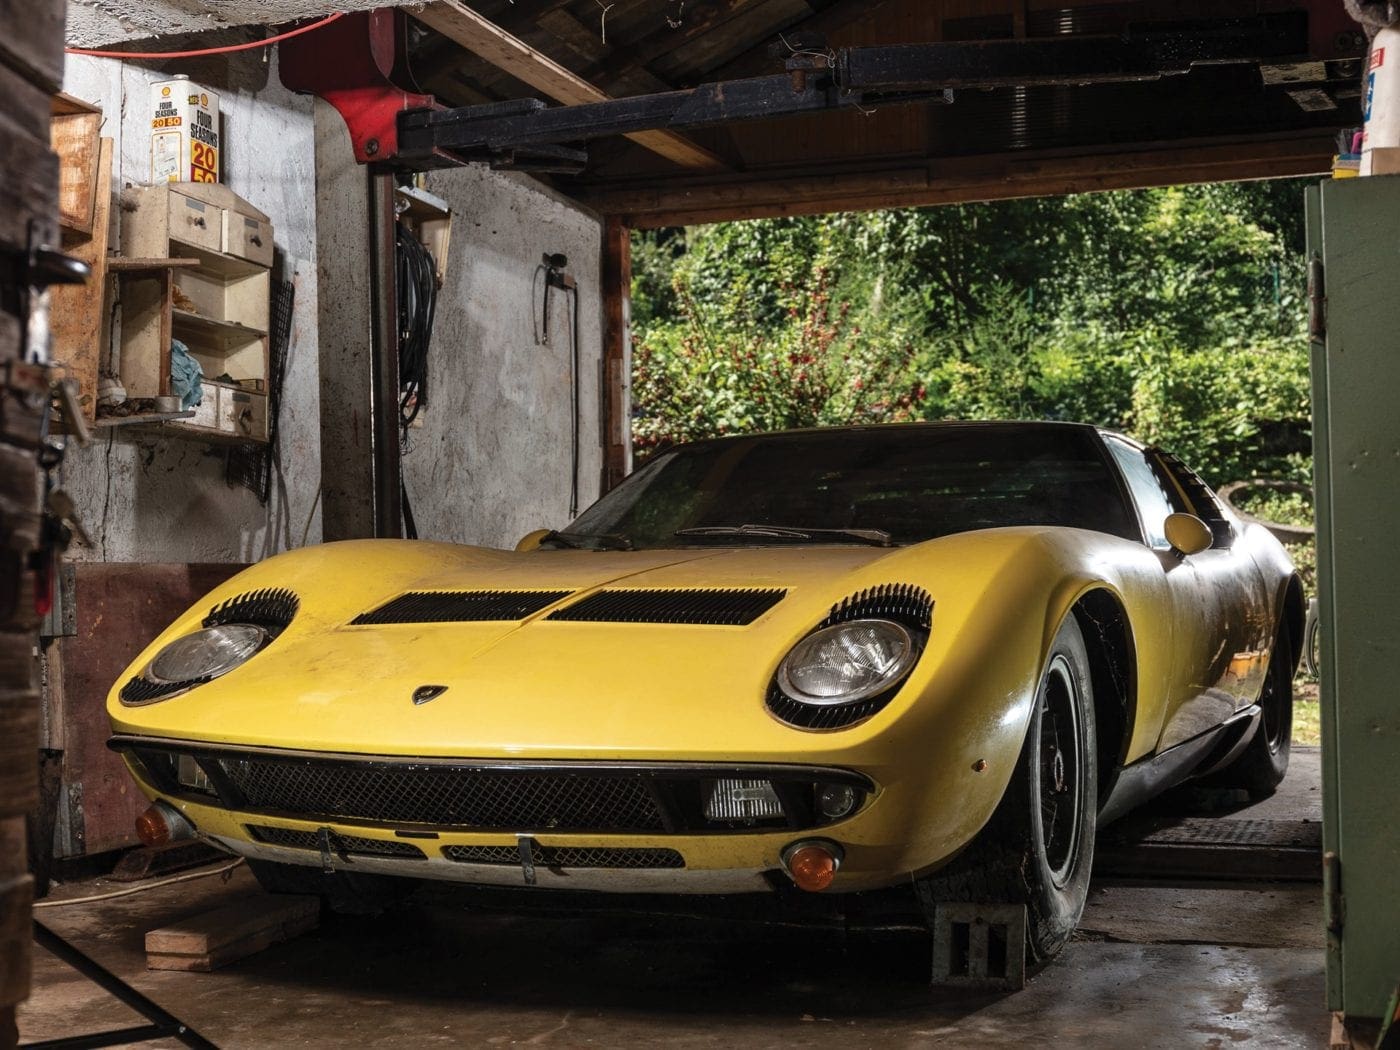 1969 Lamborghini Miura S Sold by RM Sotheby’s